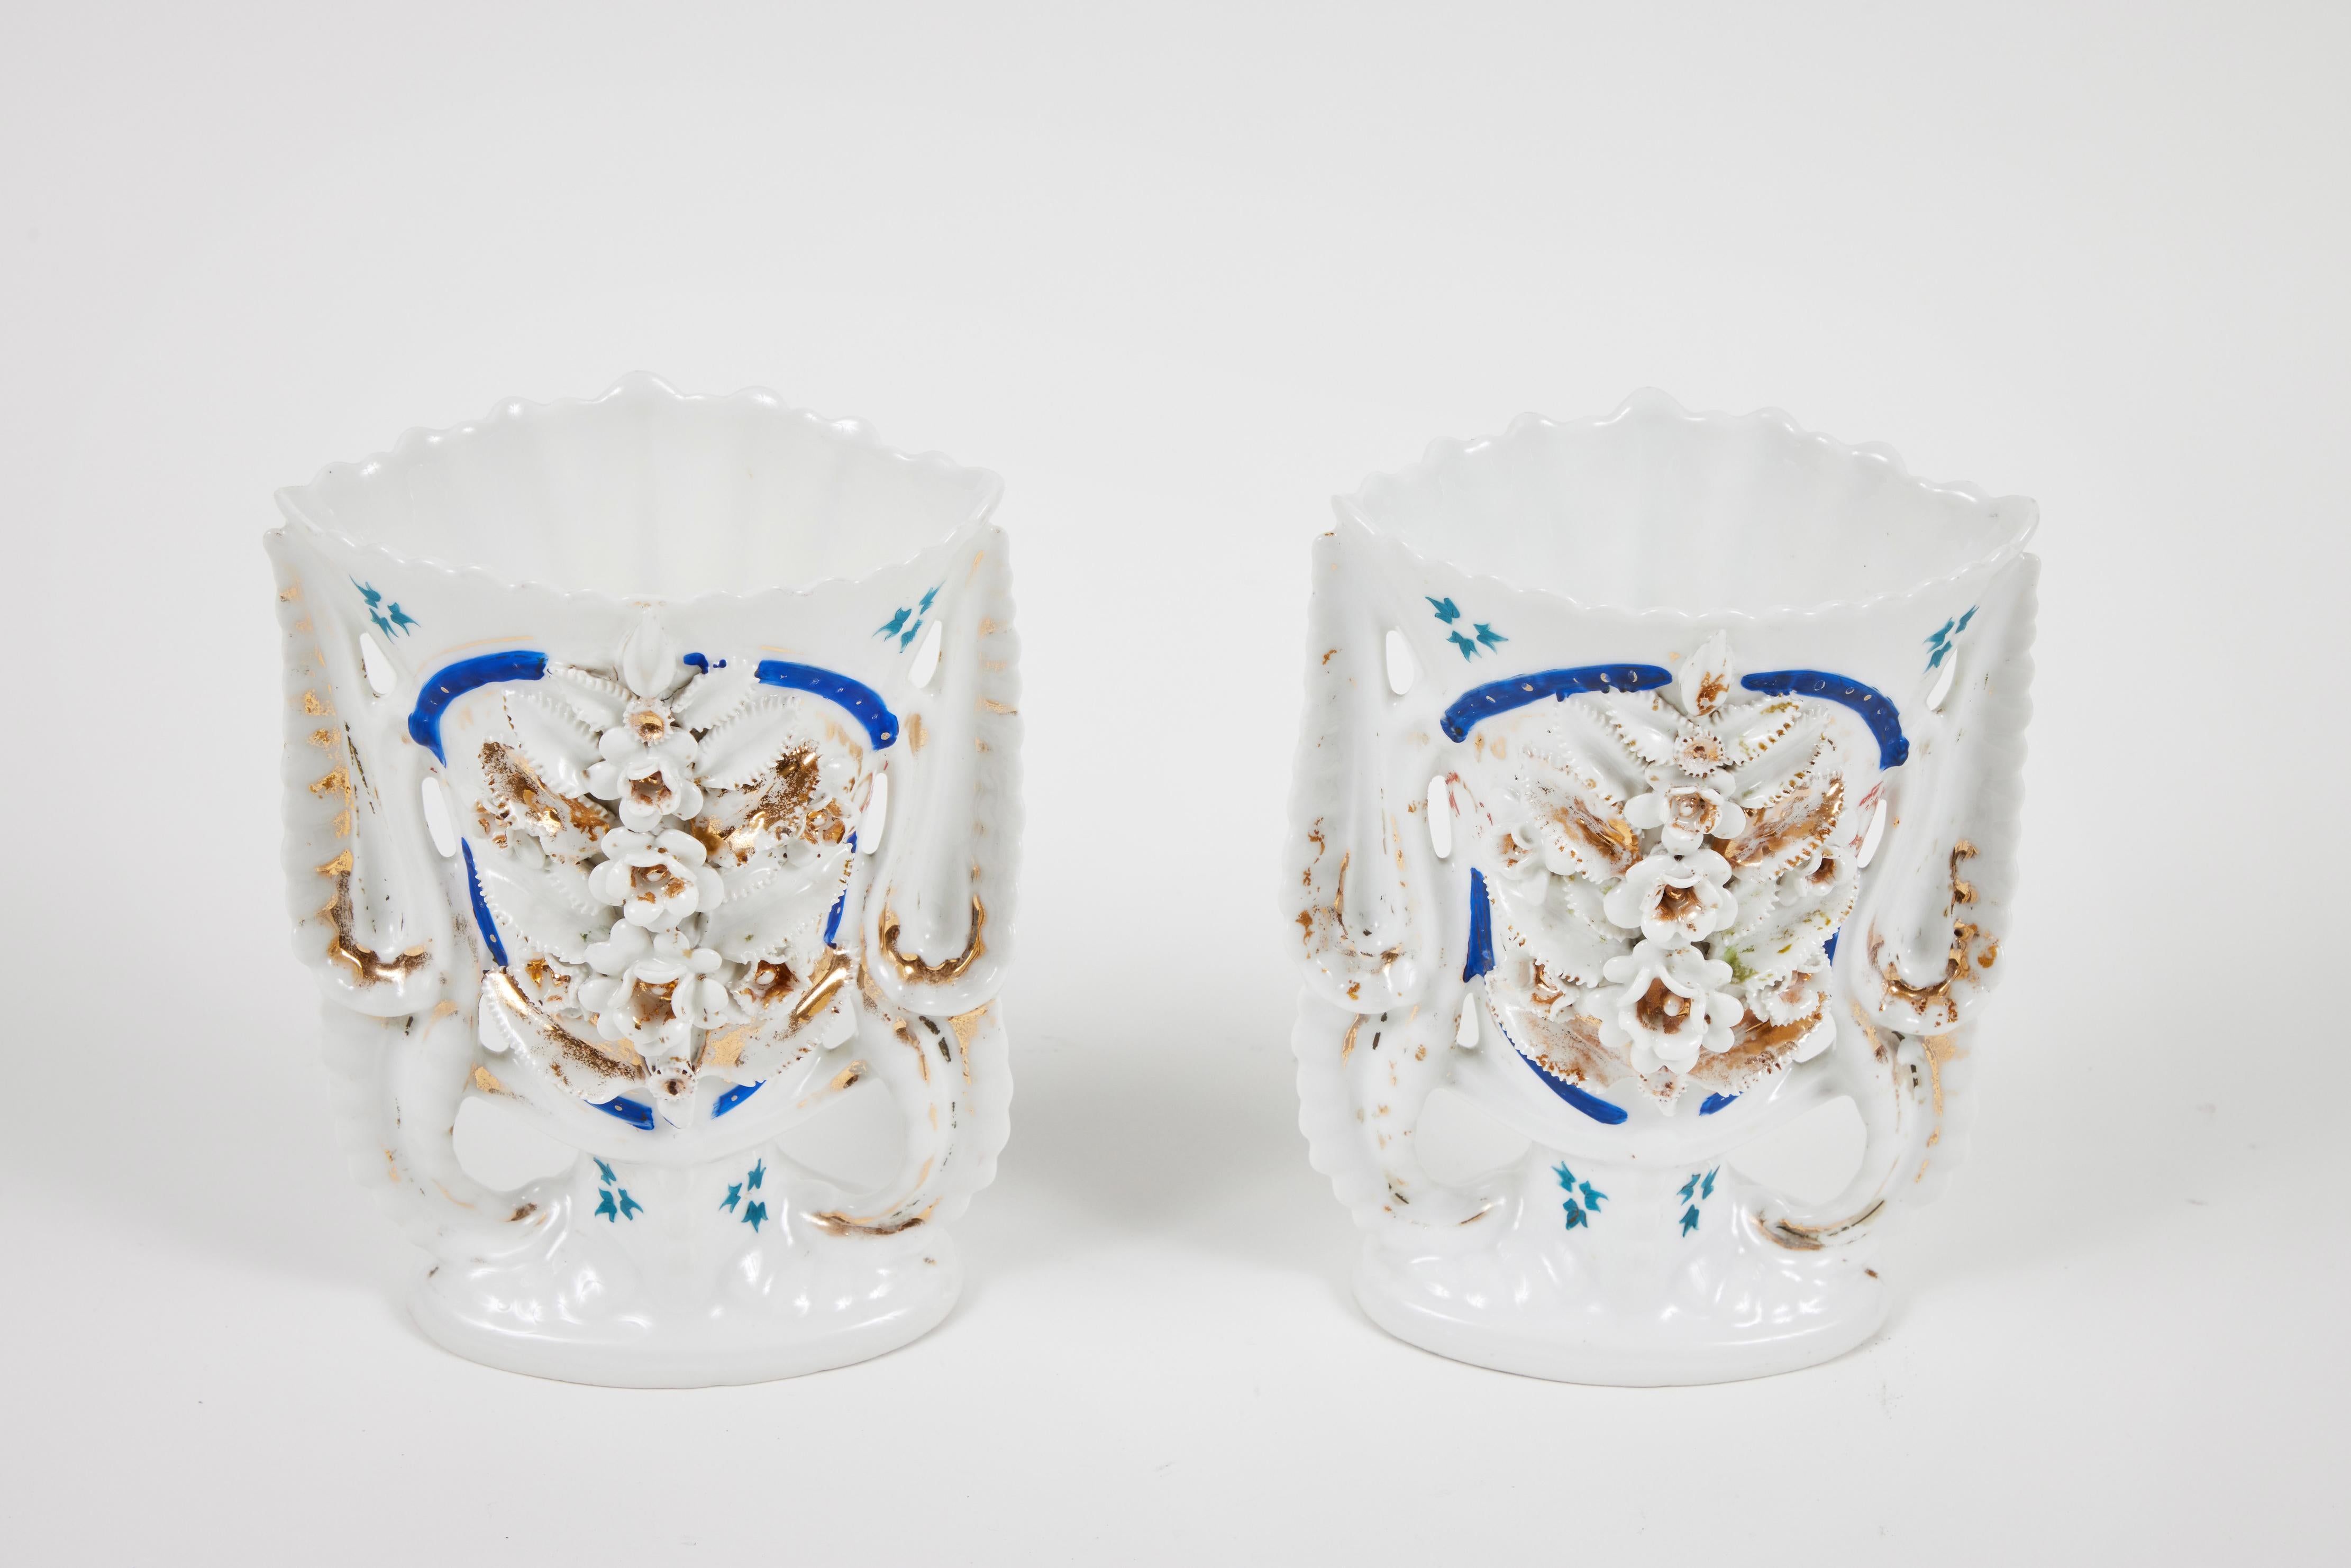 Showcase your flowers in our pair of intricately decorated Victorian porcelain mantel vases. They are meticulously adorned with 3 dimensional flowers, leaves and beaded accents and rim. These vases are white with accents of teal, cobalt and gold. An